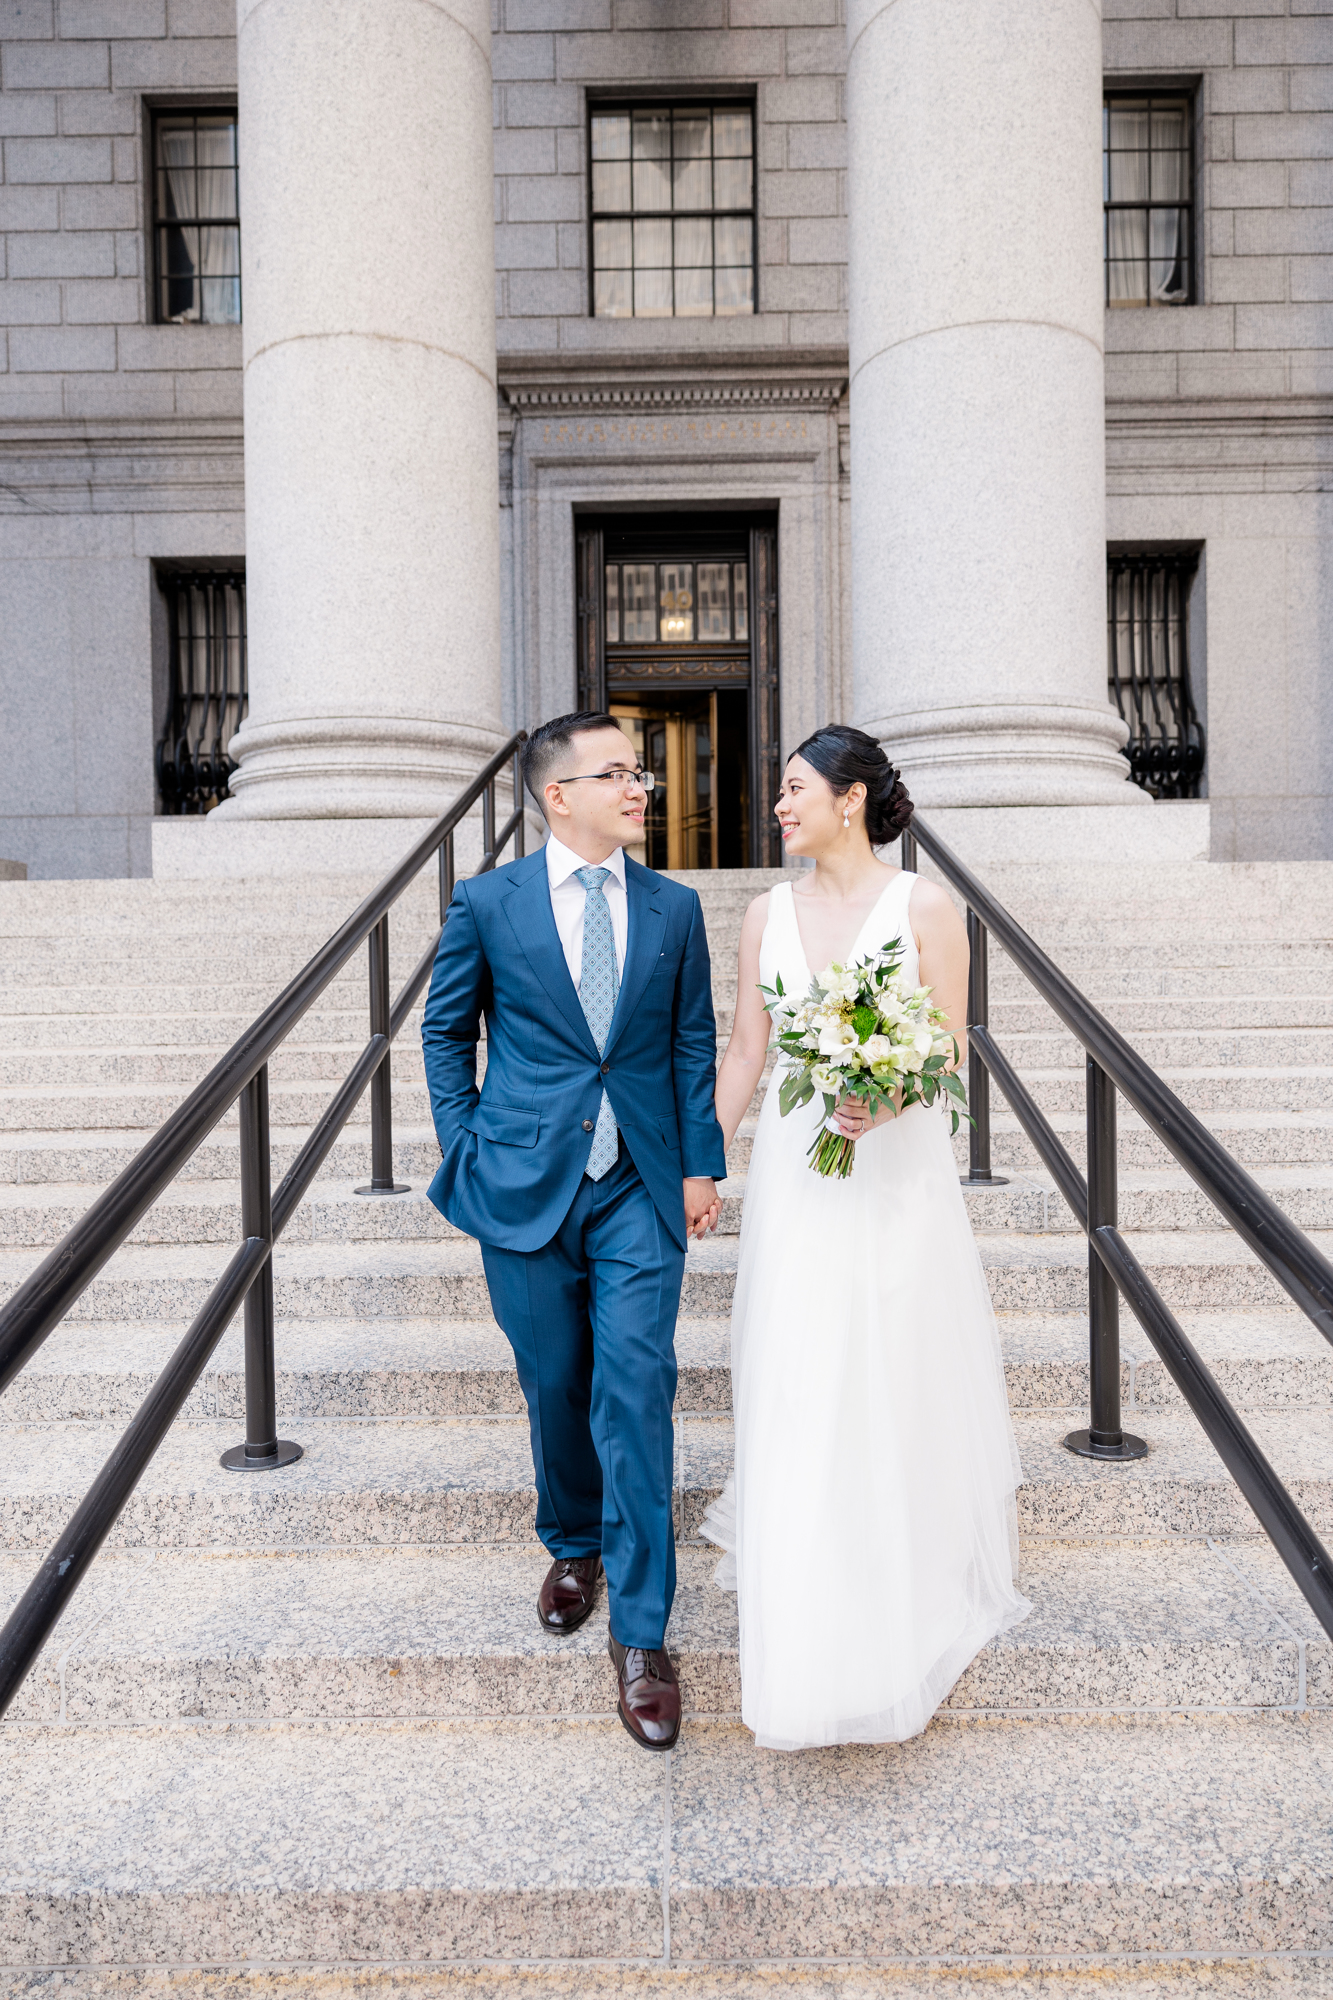 Picturesque Elopement Photos in DUMBO and Central Park New York